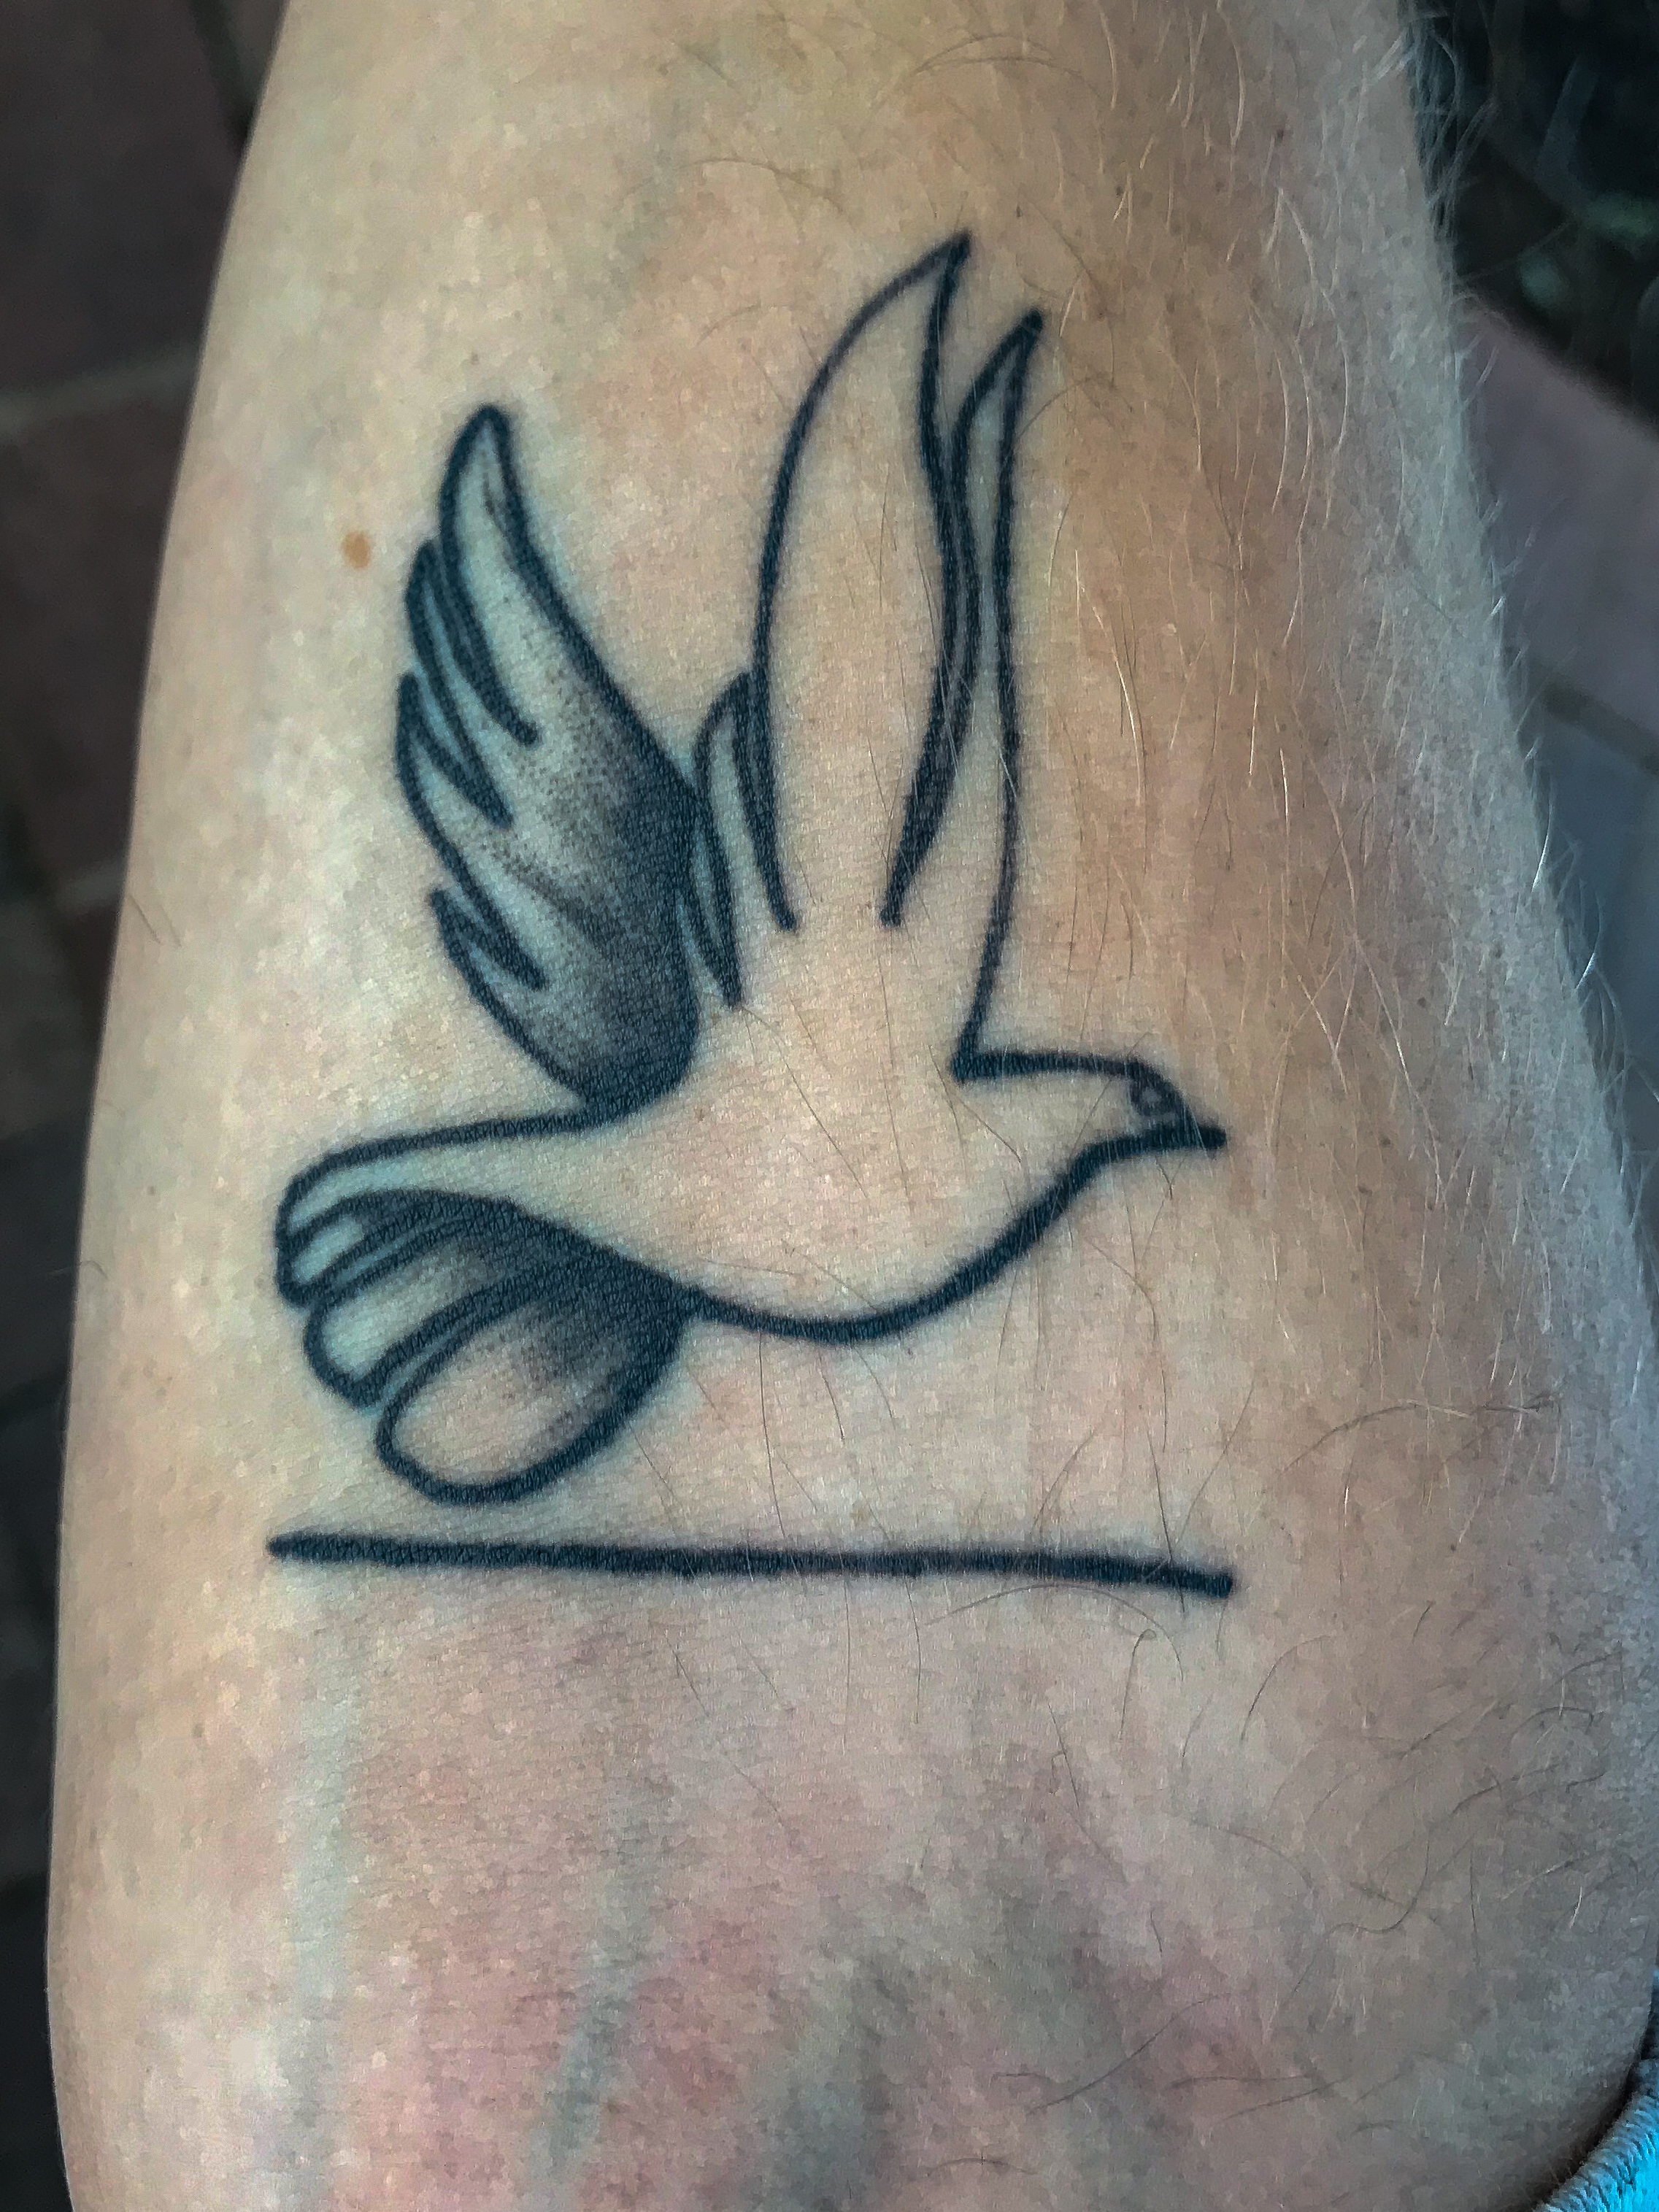 This is Jon Keseys tattoo that represents the Holy Spirit and calm waters. Kesey got this tattoo after his father passed away of brain cancer. During his fathers time here, he reminded Jon that everything would be fine because we have been given t